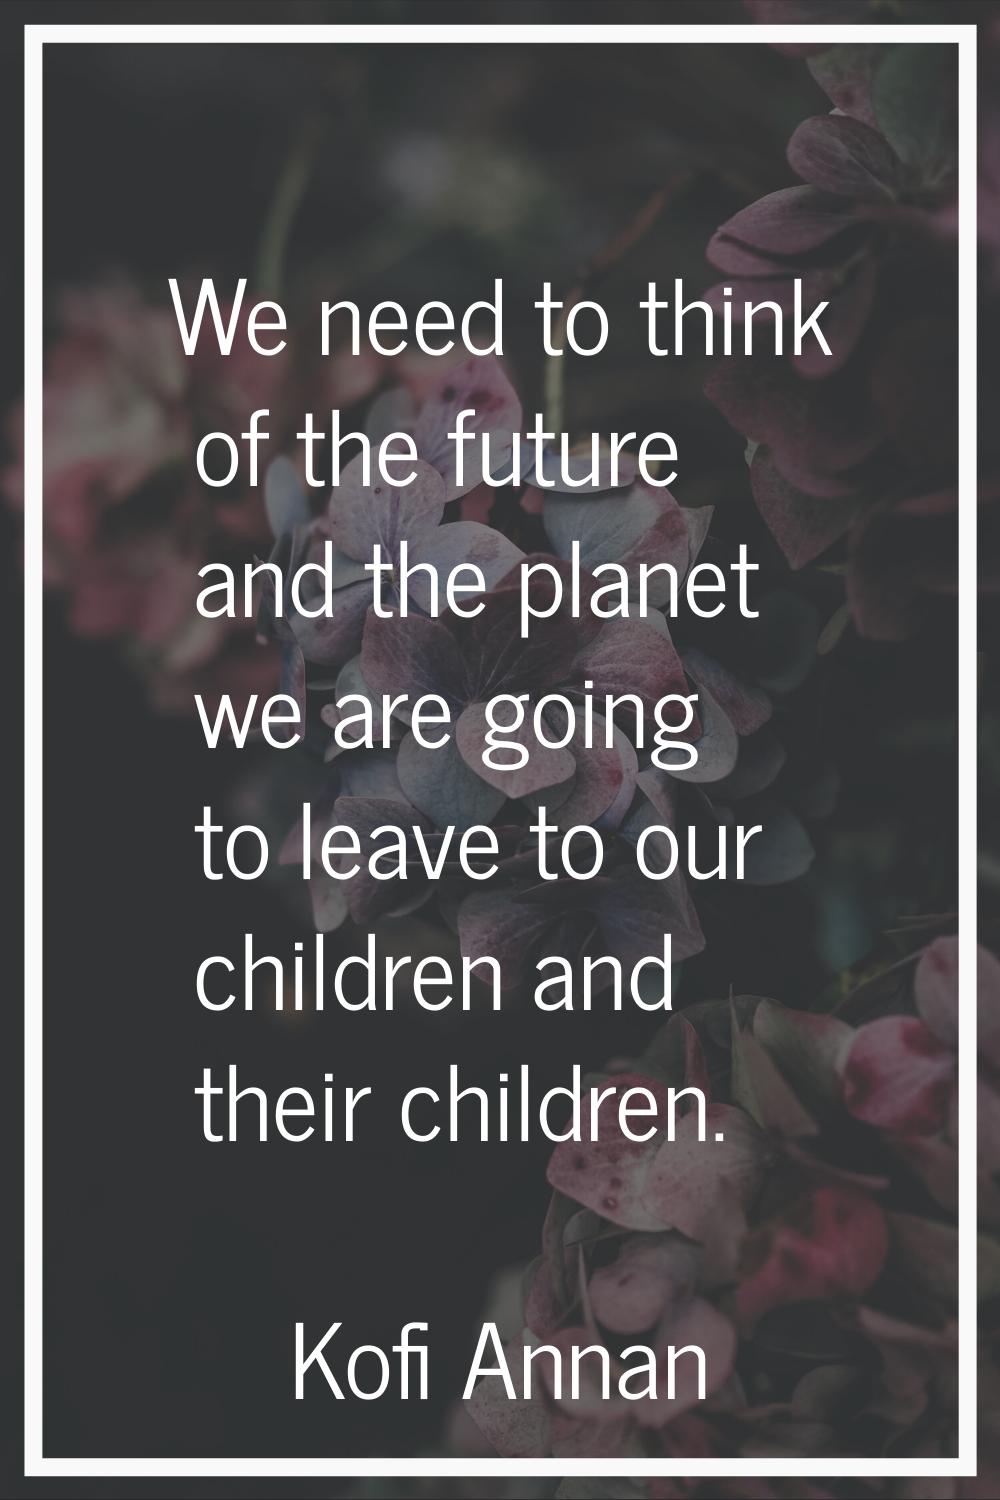 We need to think of the future and the planet we are going to leave to our children and their child